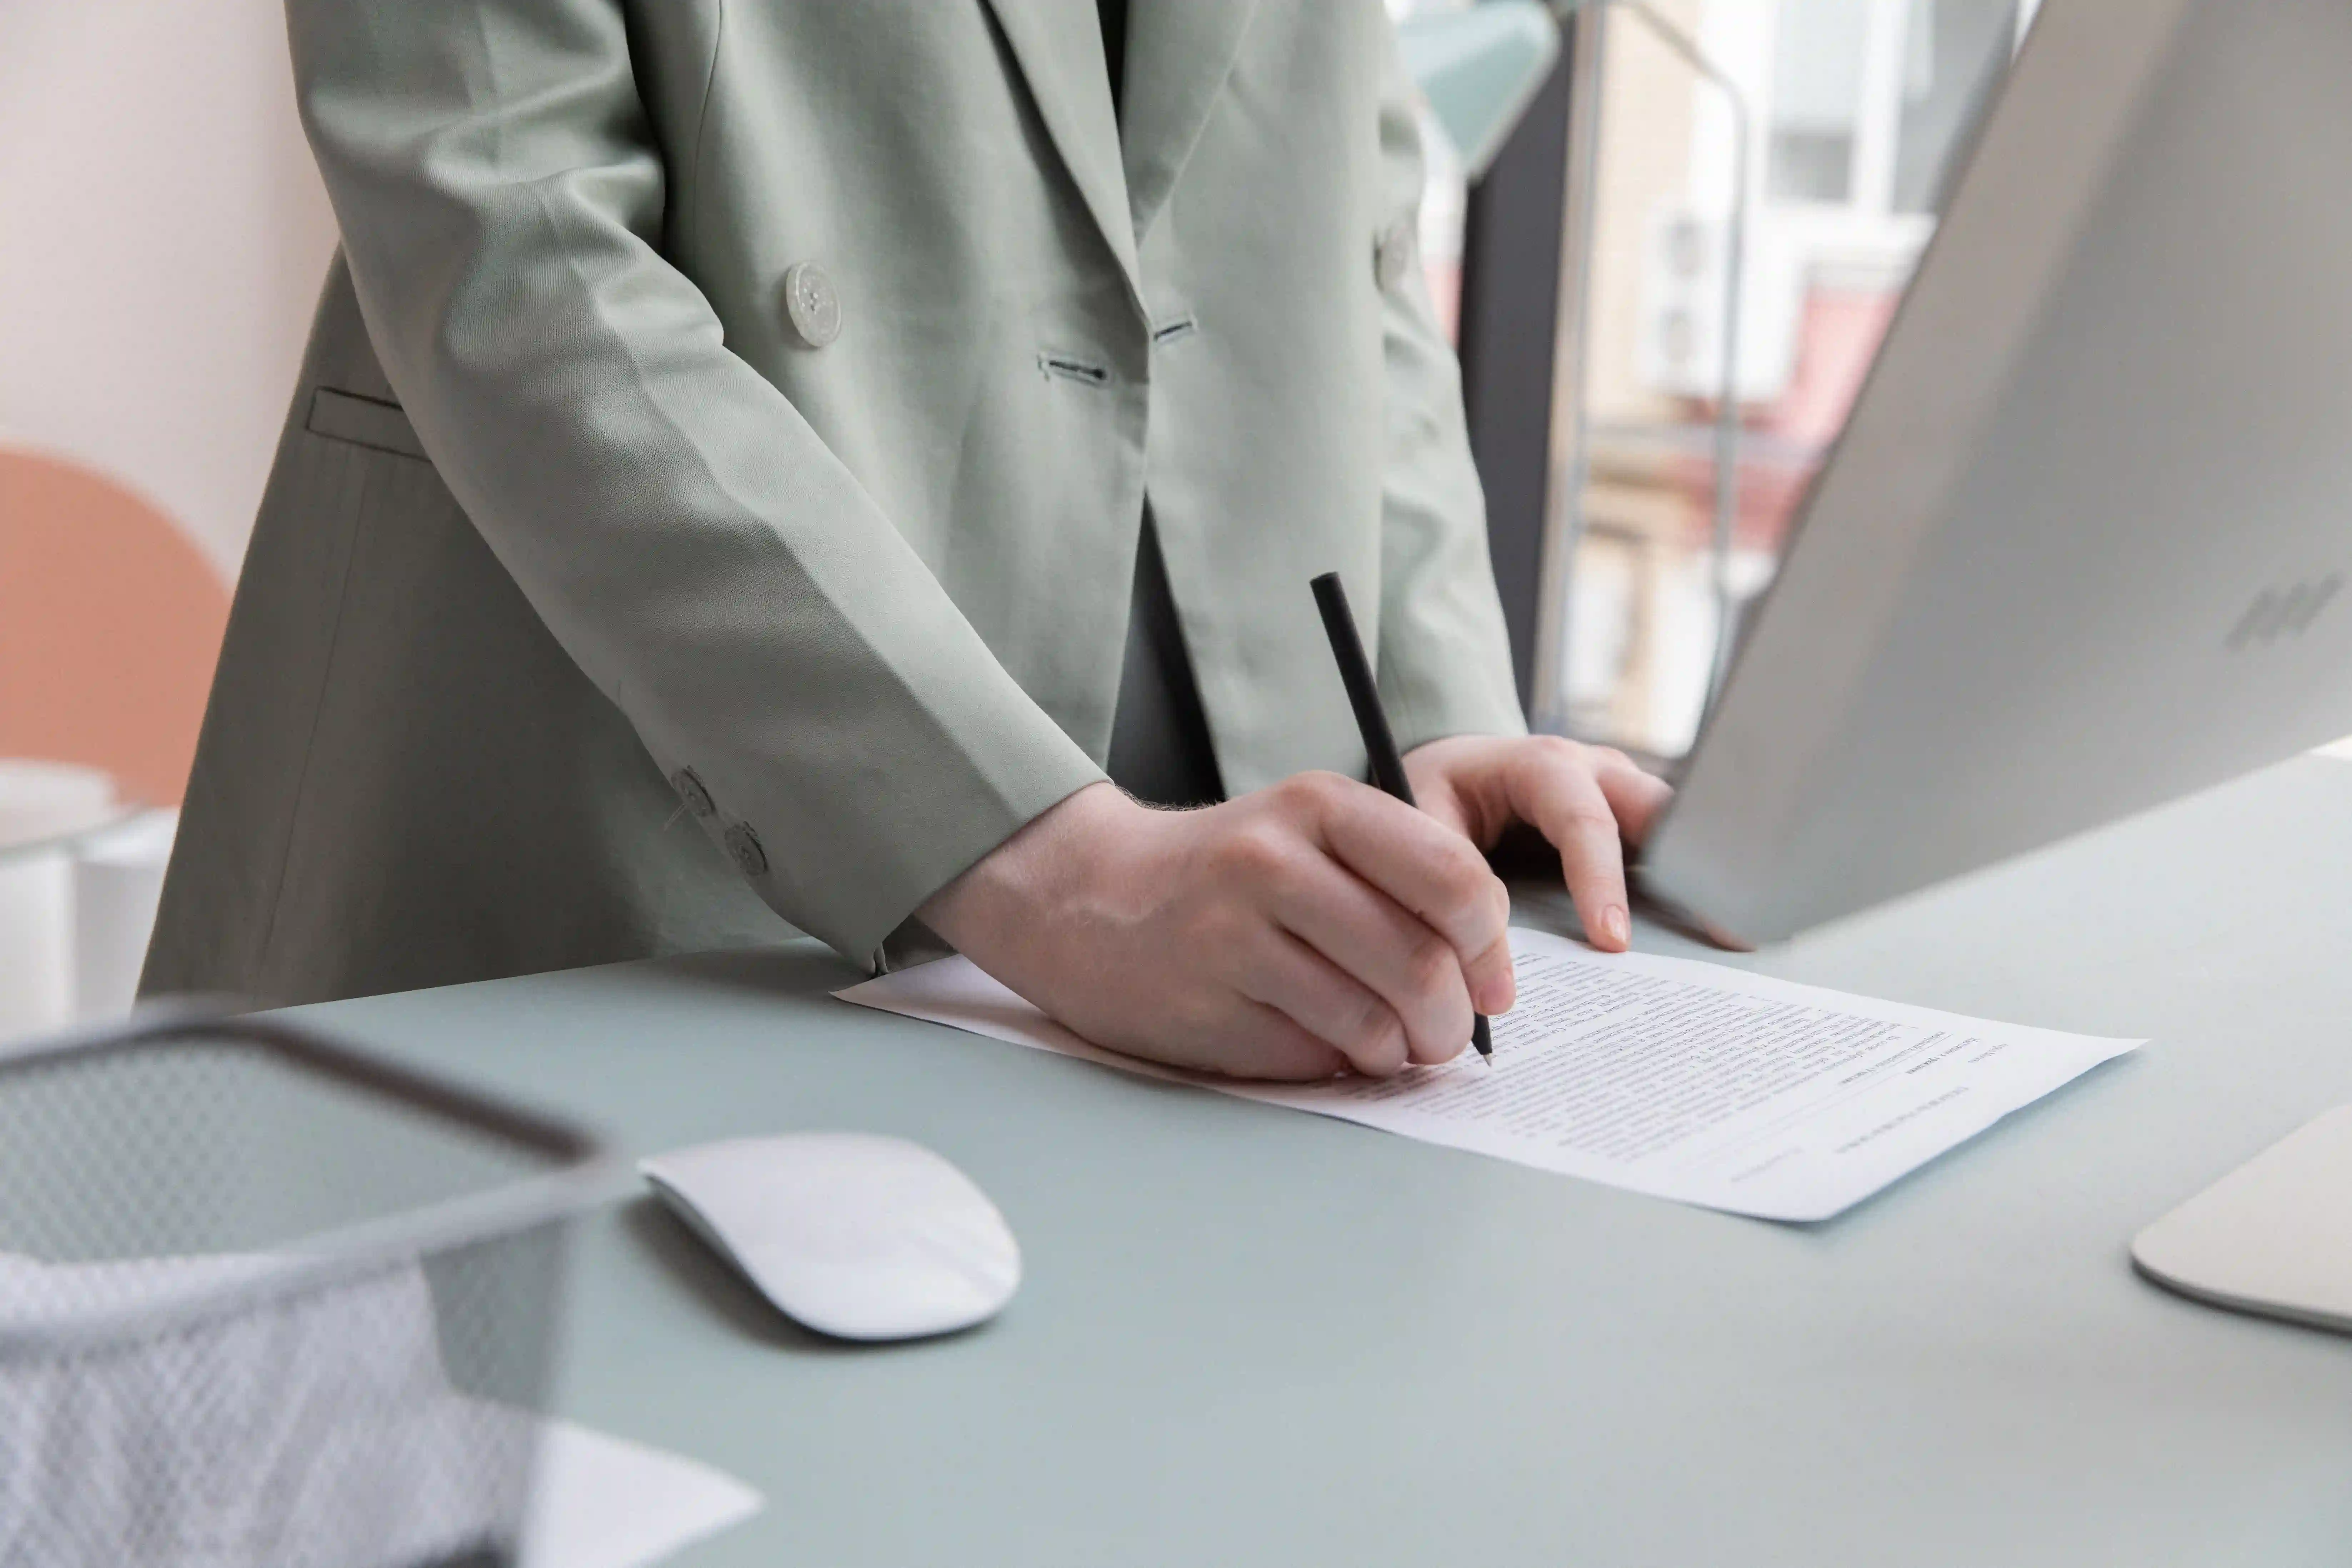 picture of a person standing at a desk writing on document